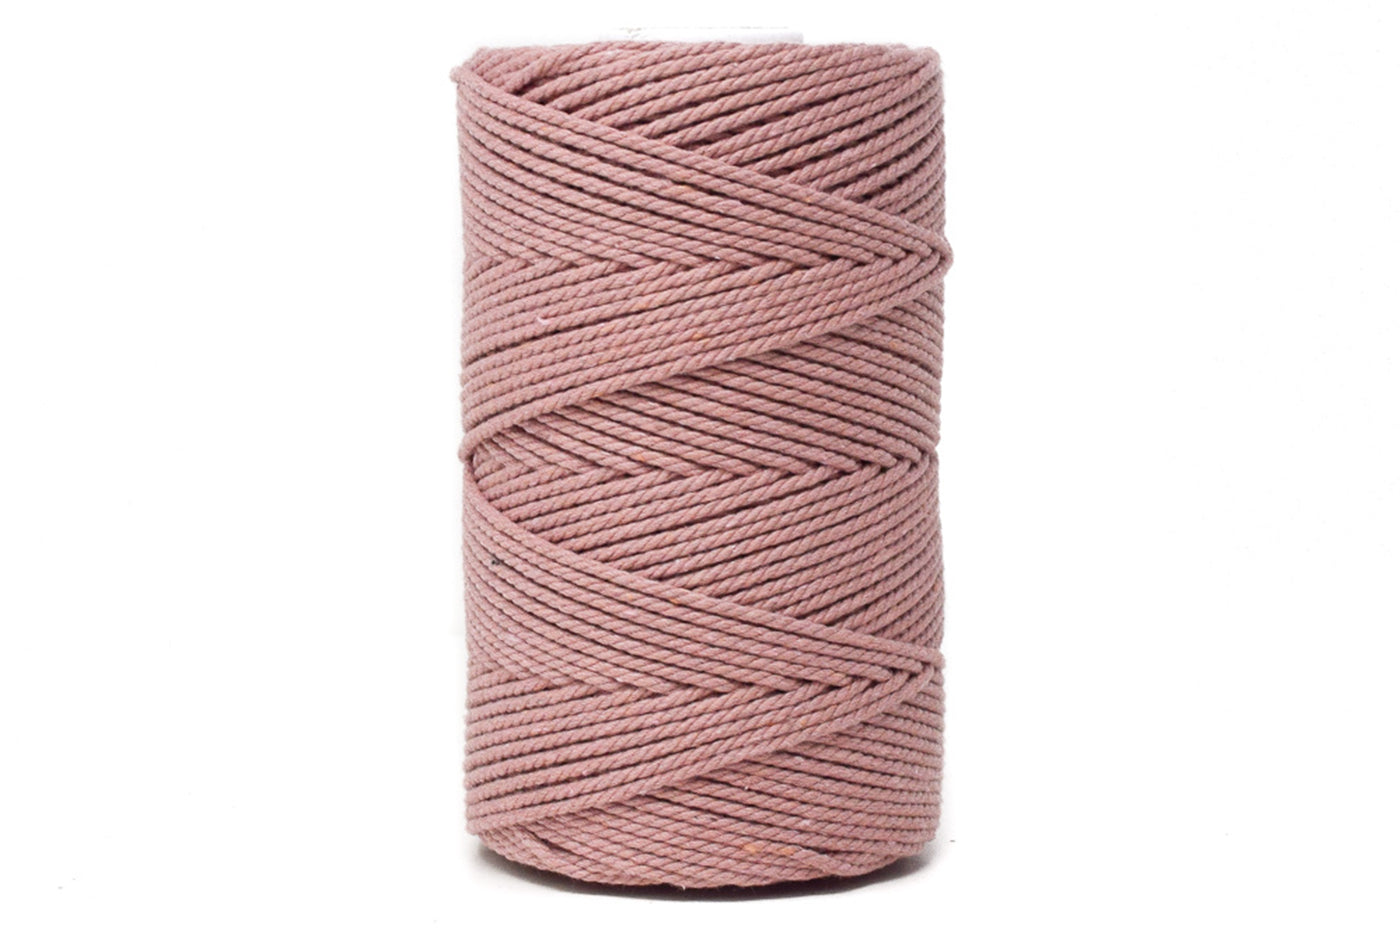 COTTON ROPE ZERO WASTE 2 MM - 3 PLY - VINTAGE ROSE COLOR